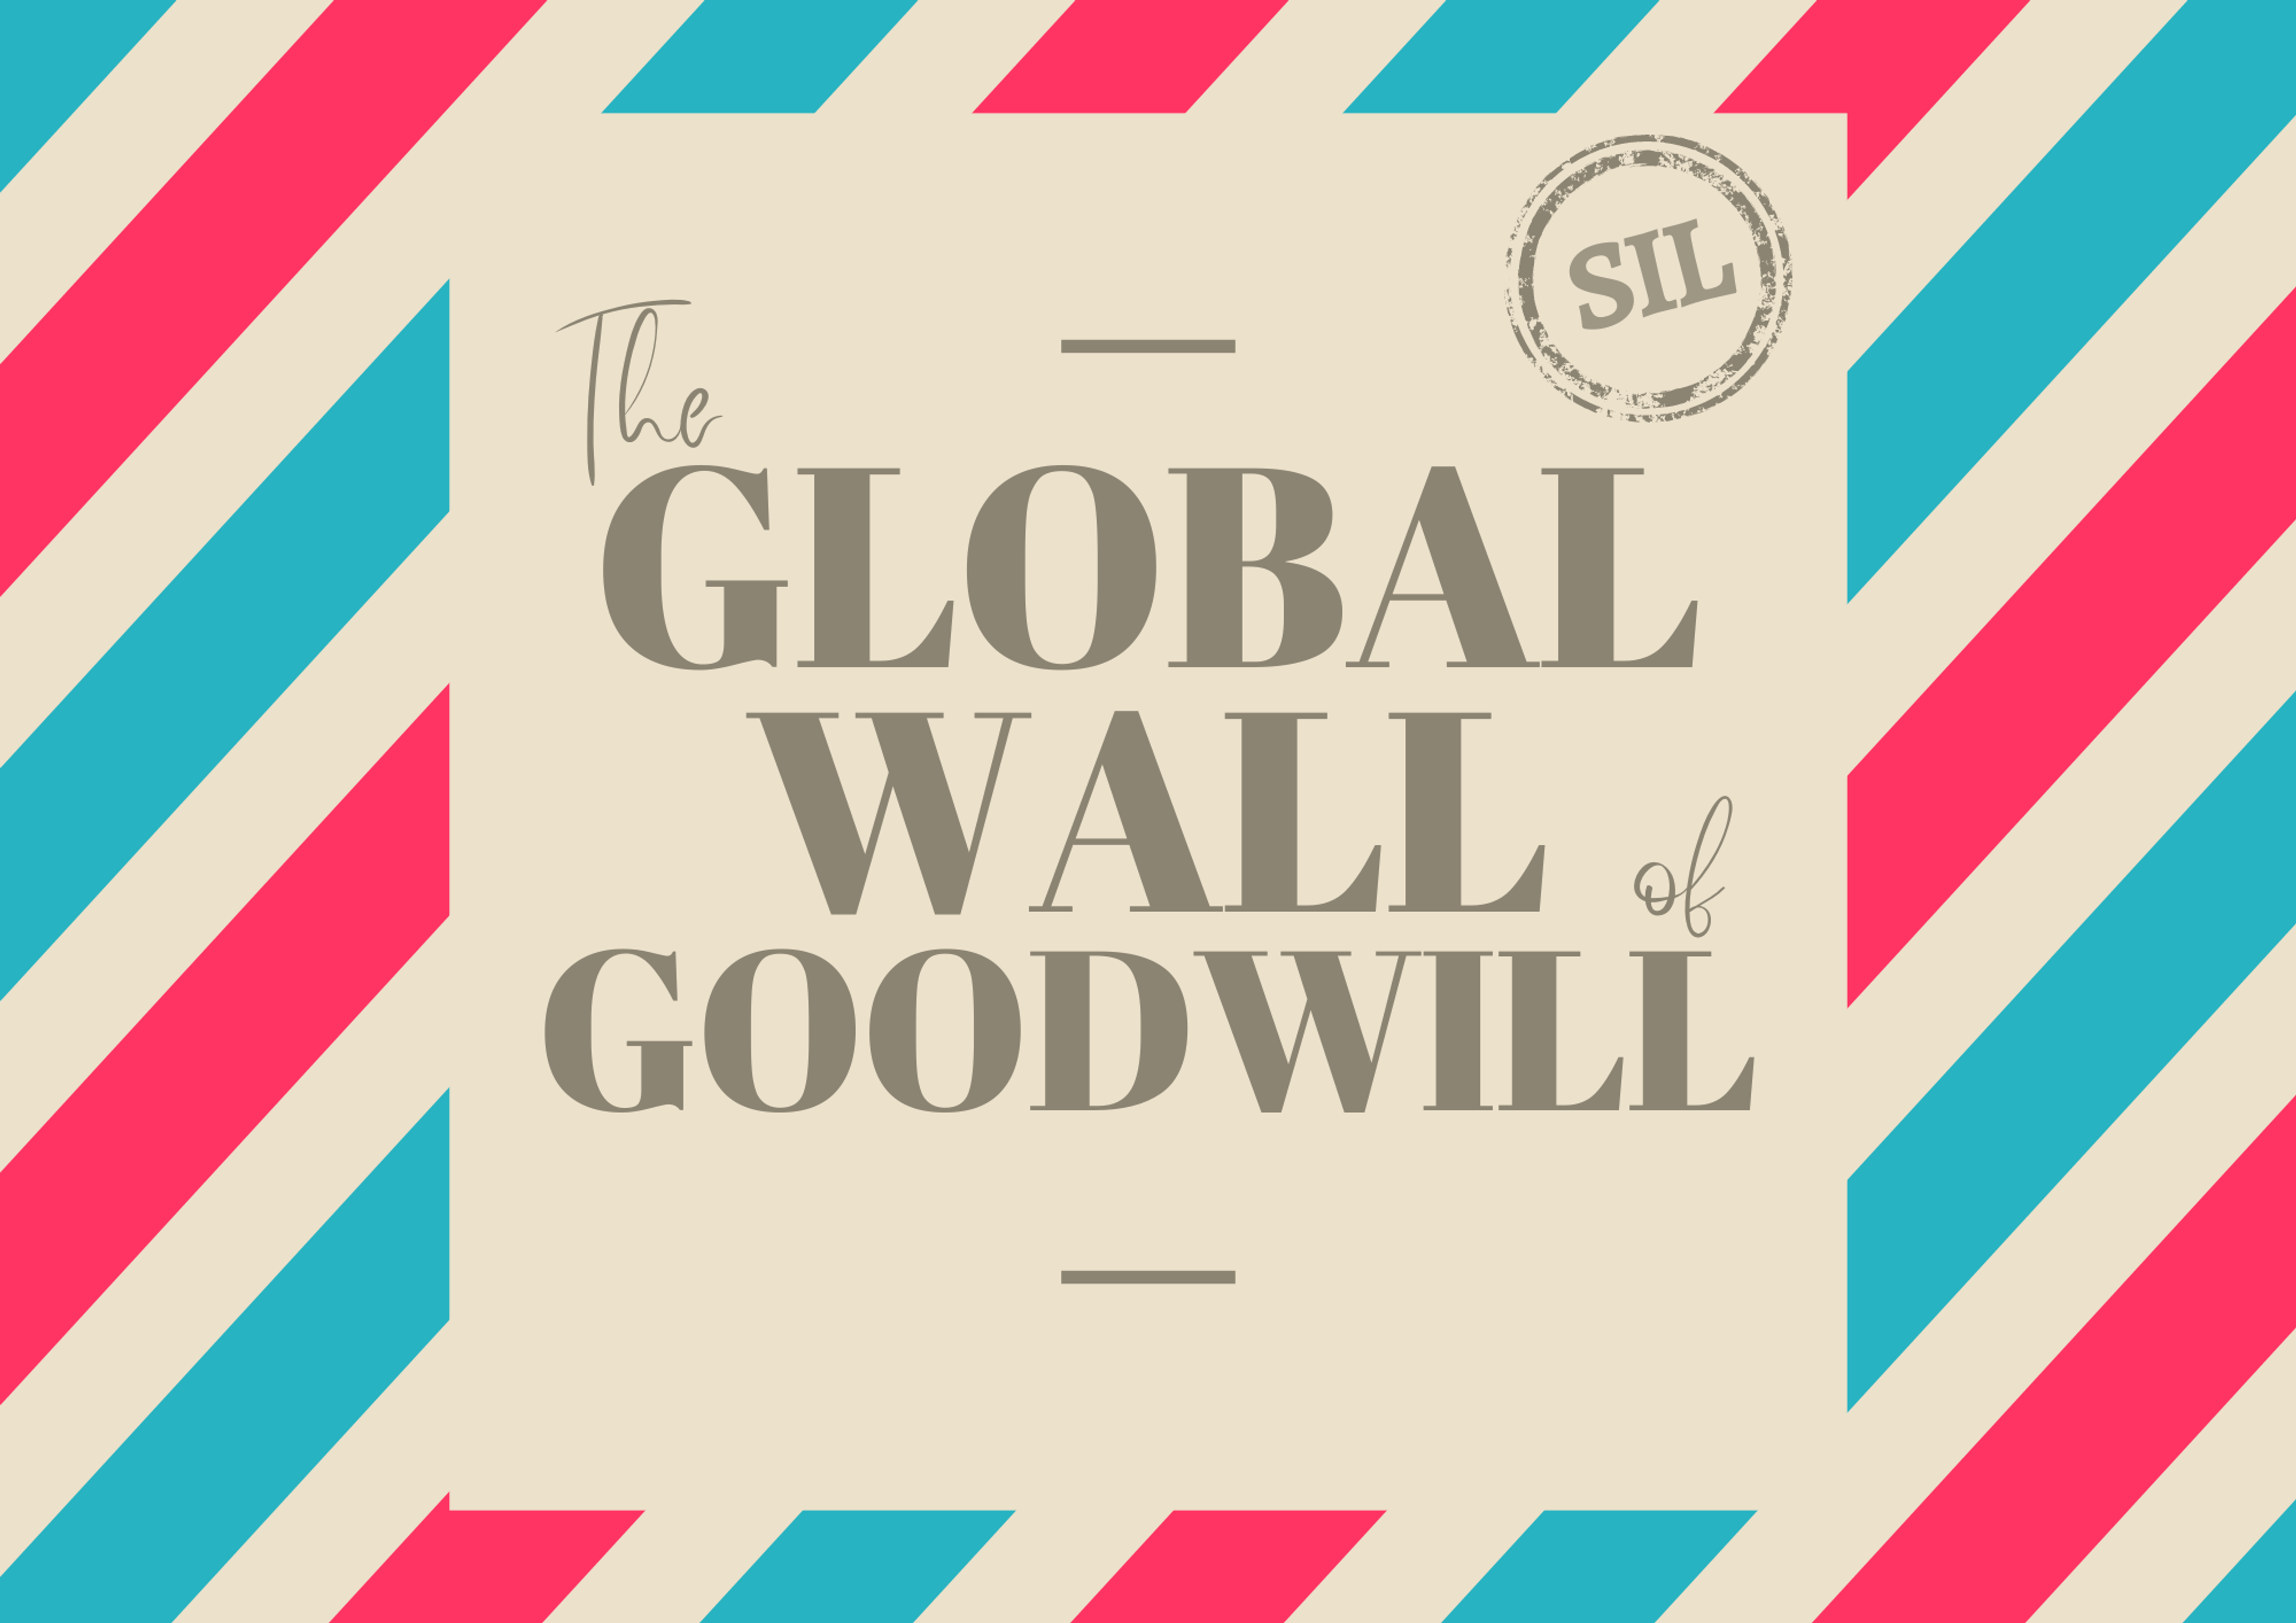 The Global Wall of Goodwill